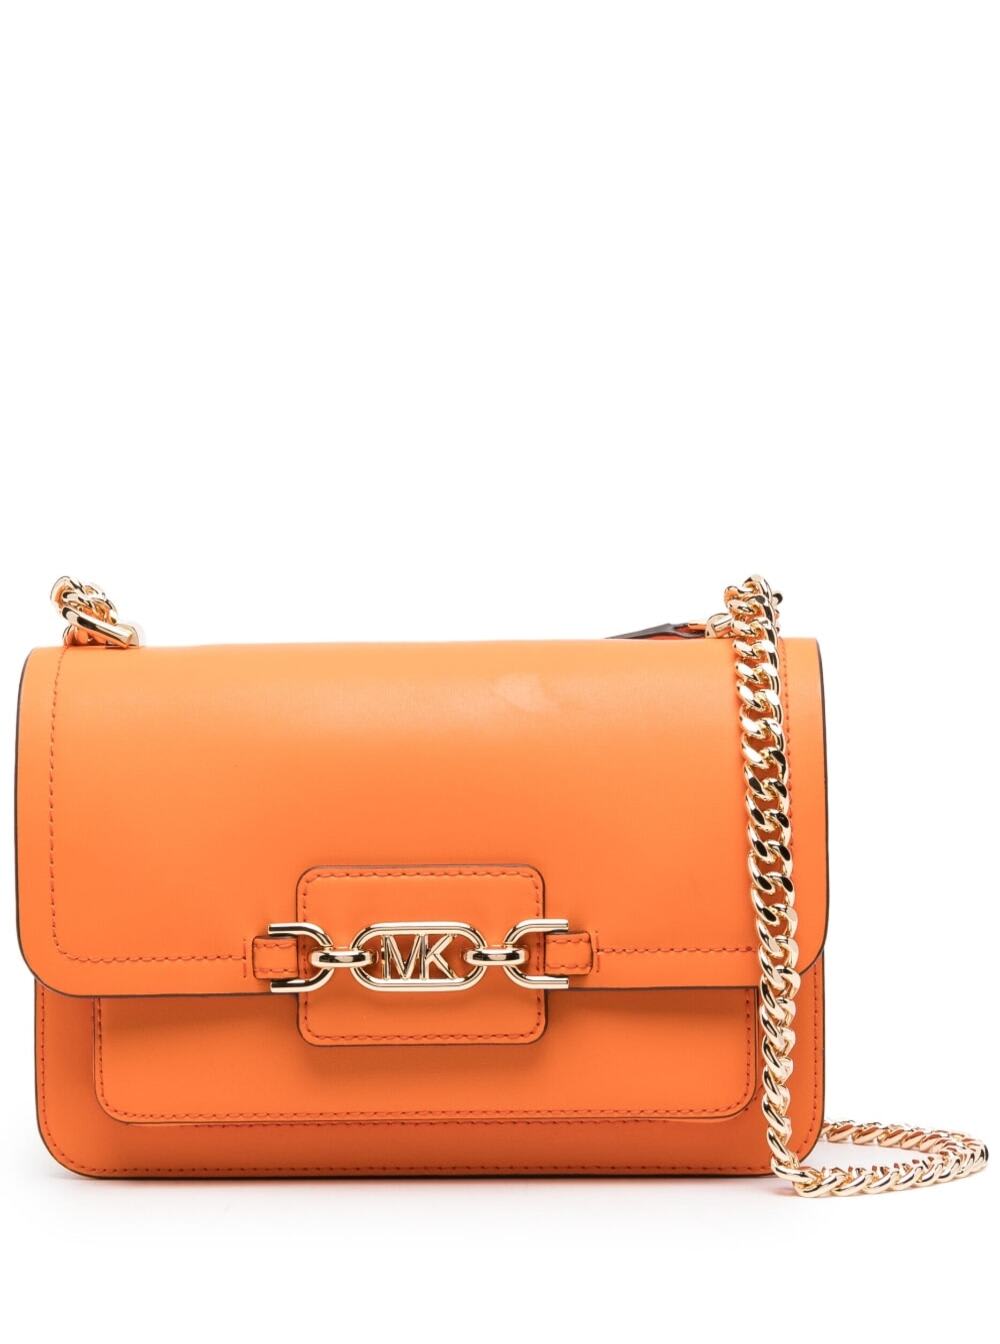 Michael Michael Kors Heather Orange Shoulder Bag With Mk Logo In Smooth Leather Woman